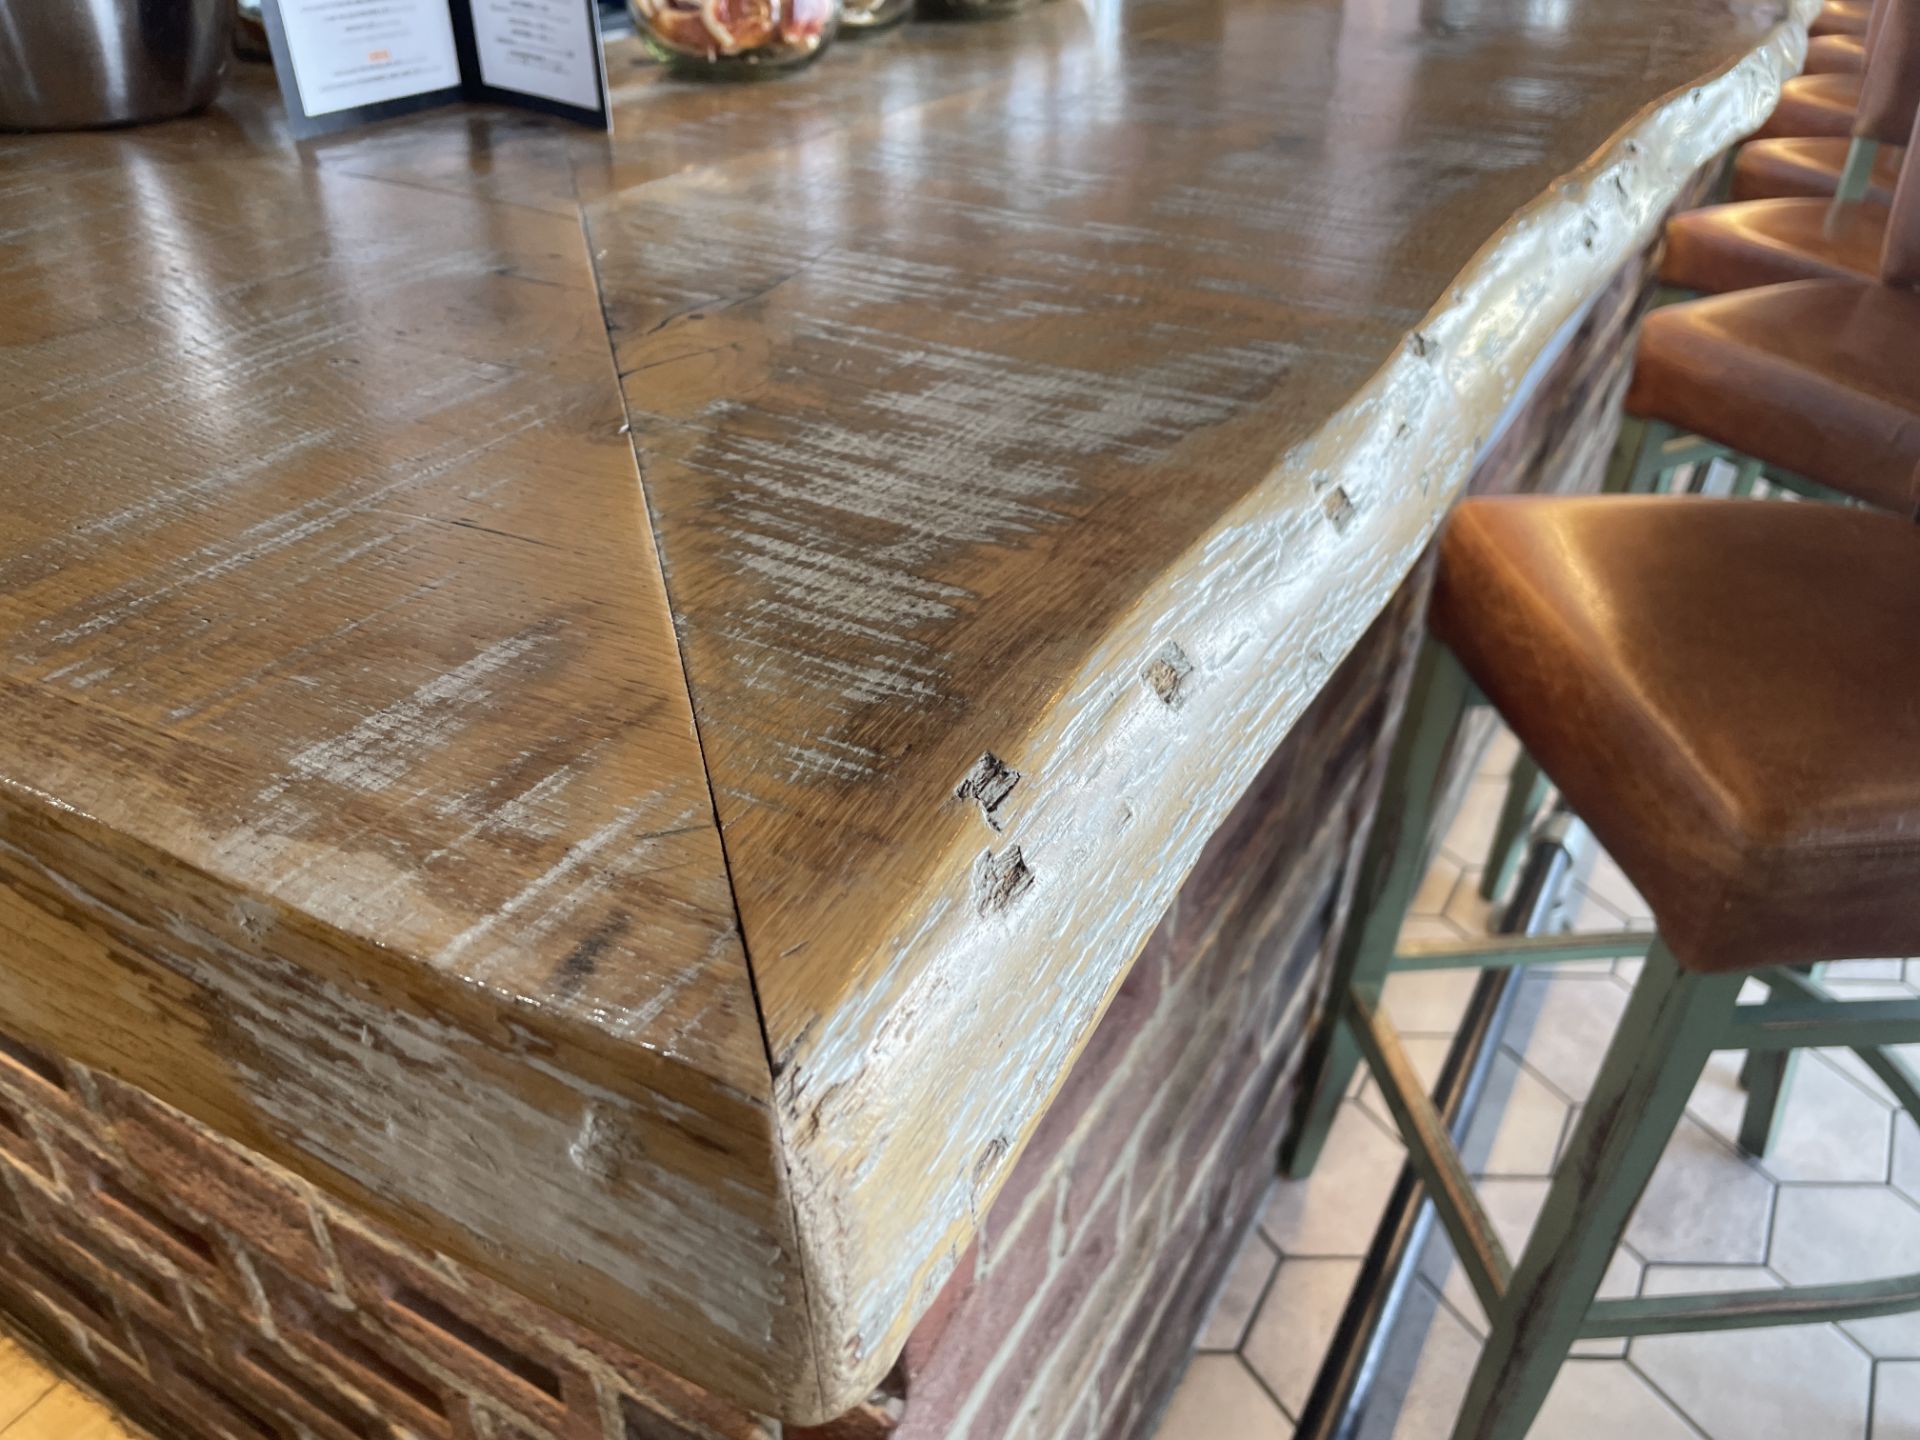 1 x Rustic Knotty Oak L Shaped Bar Top With an Earthy Finish and Live Edge - Approx 22ft in Legth! - Image 6 of 16